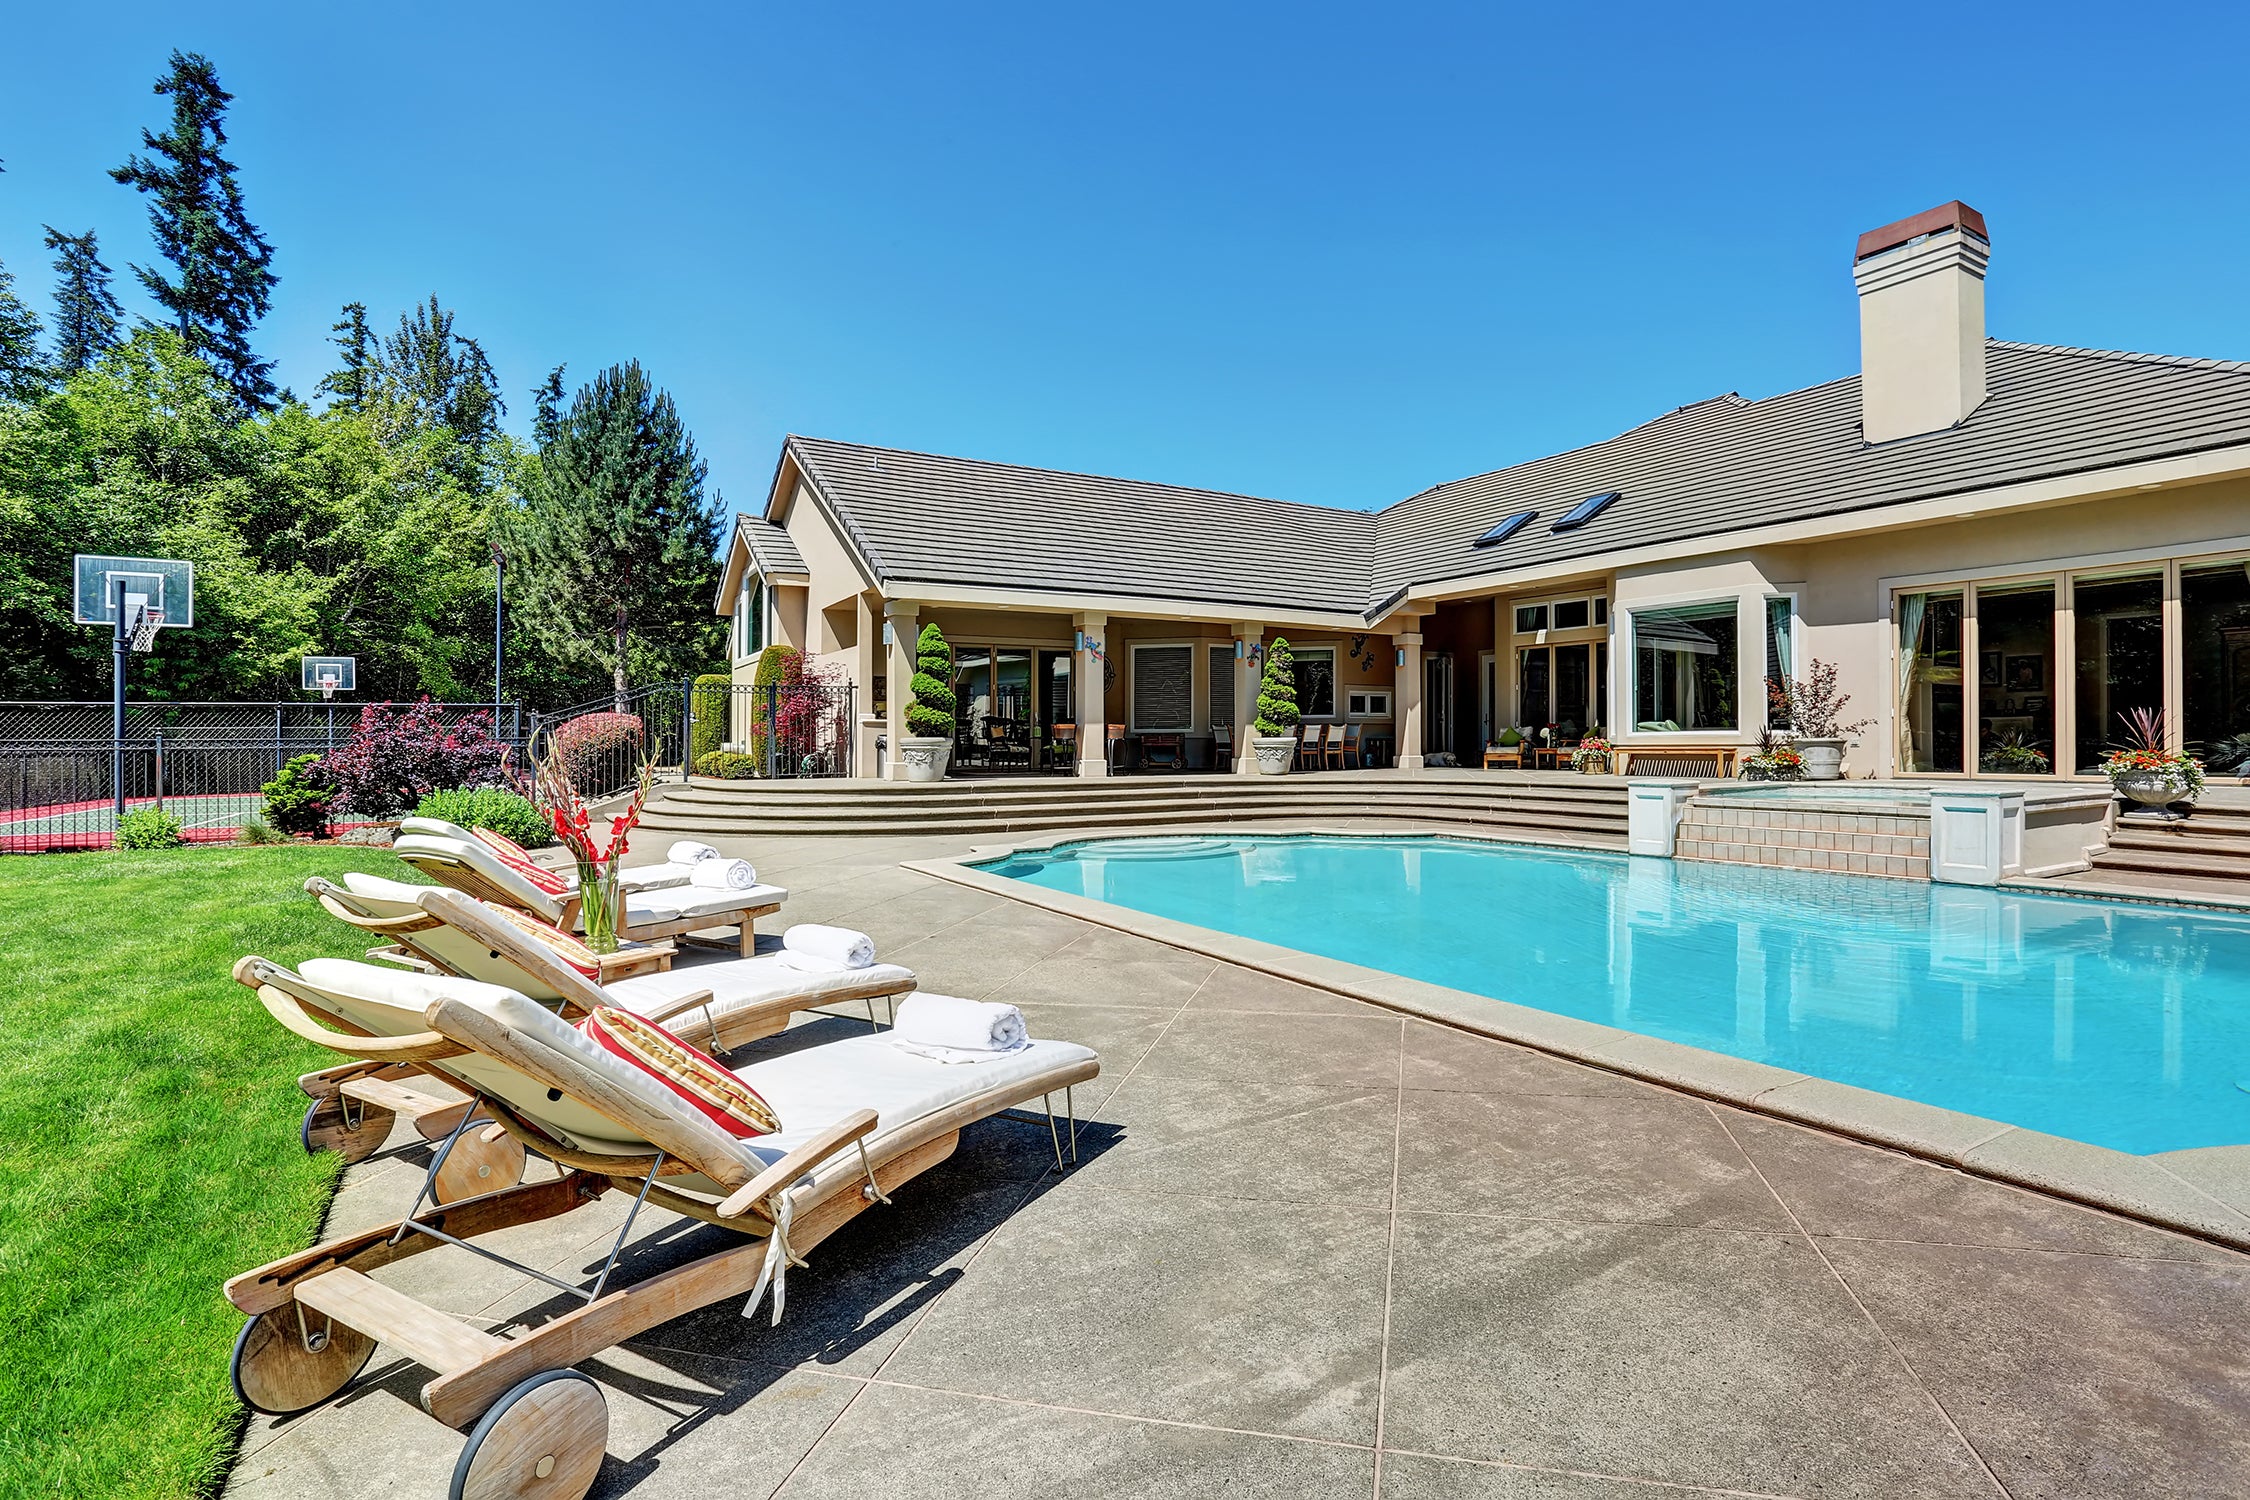 Backyard pool with loungers on the side. The house is in the background and it is a bright spring or summer day.